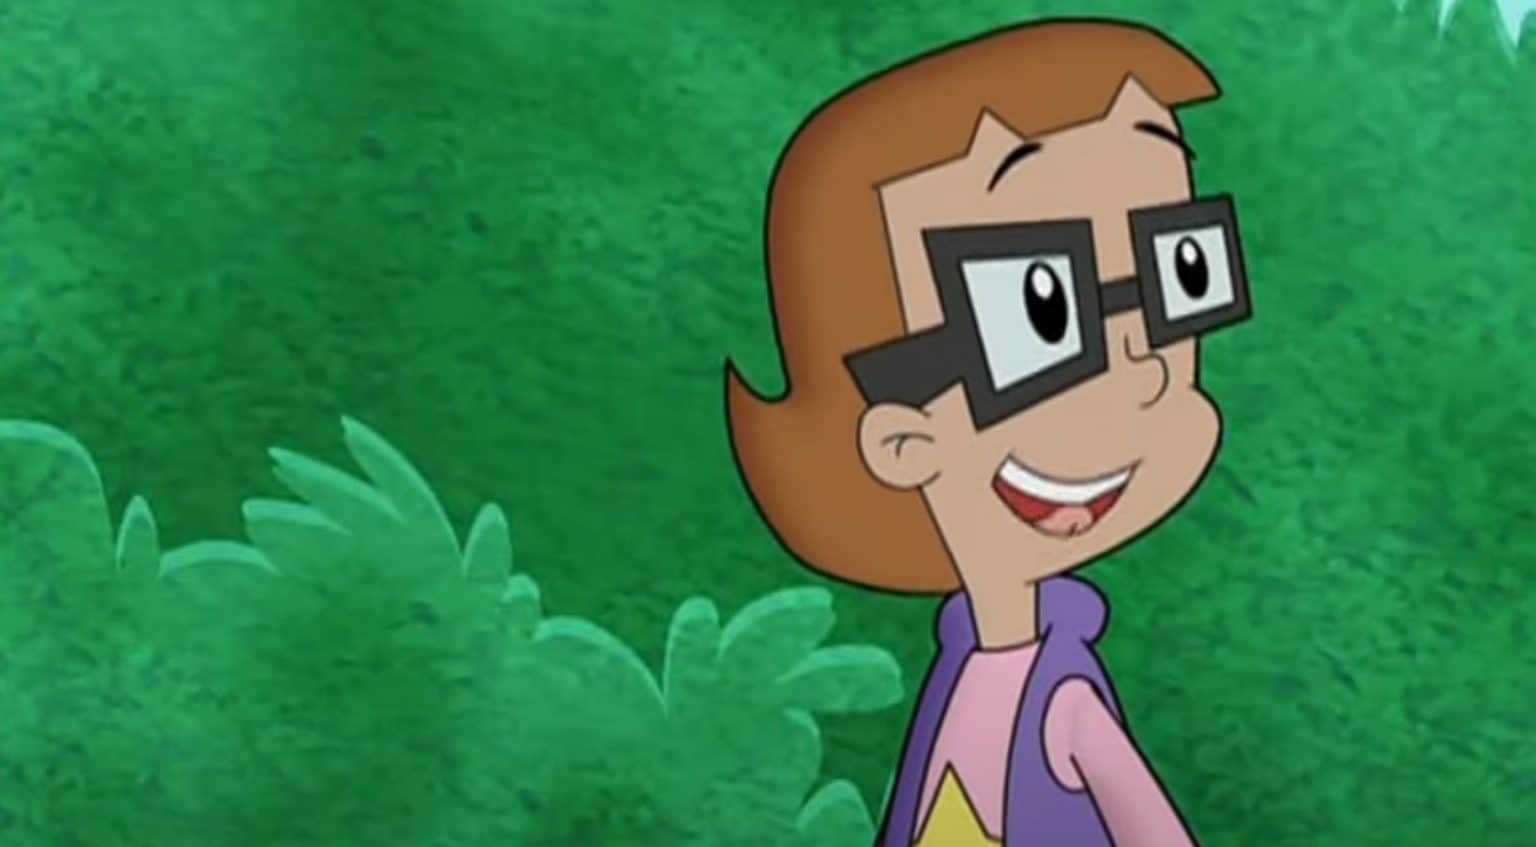 Cyberchase Season 14 Episode 1 Release Date, Preview & Streaming Guide